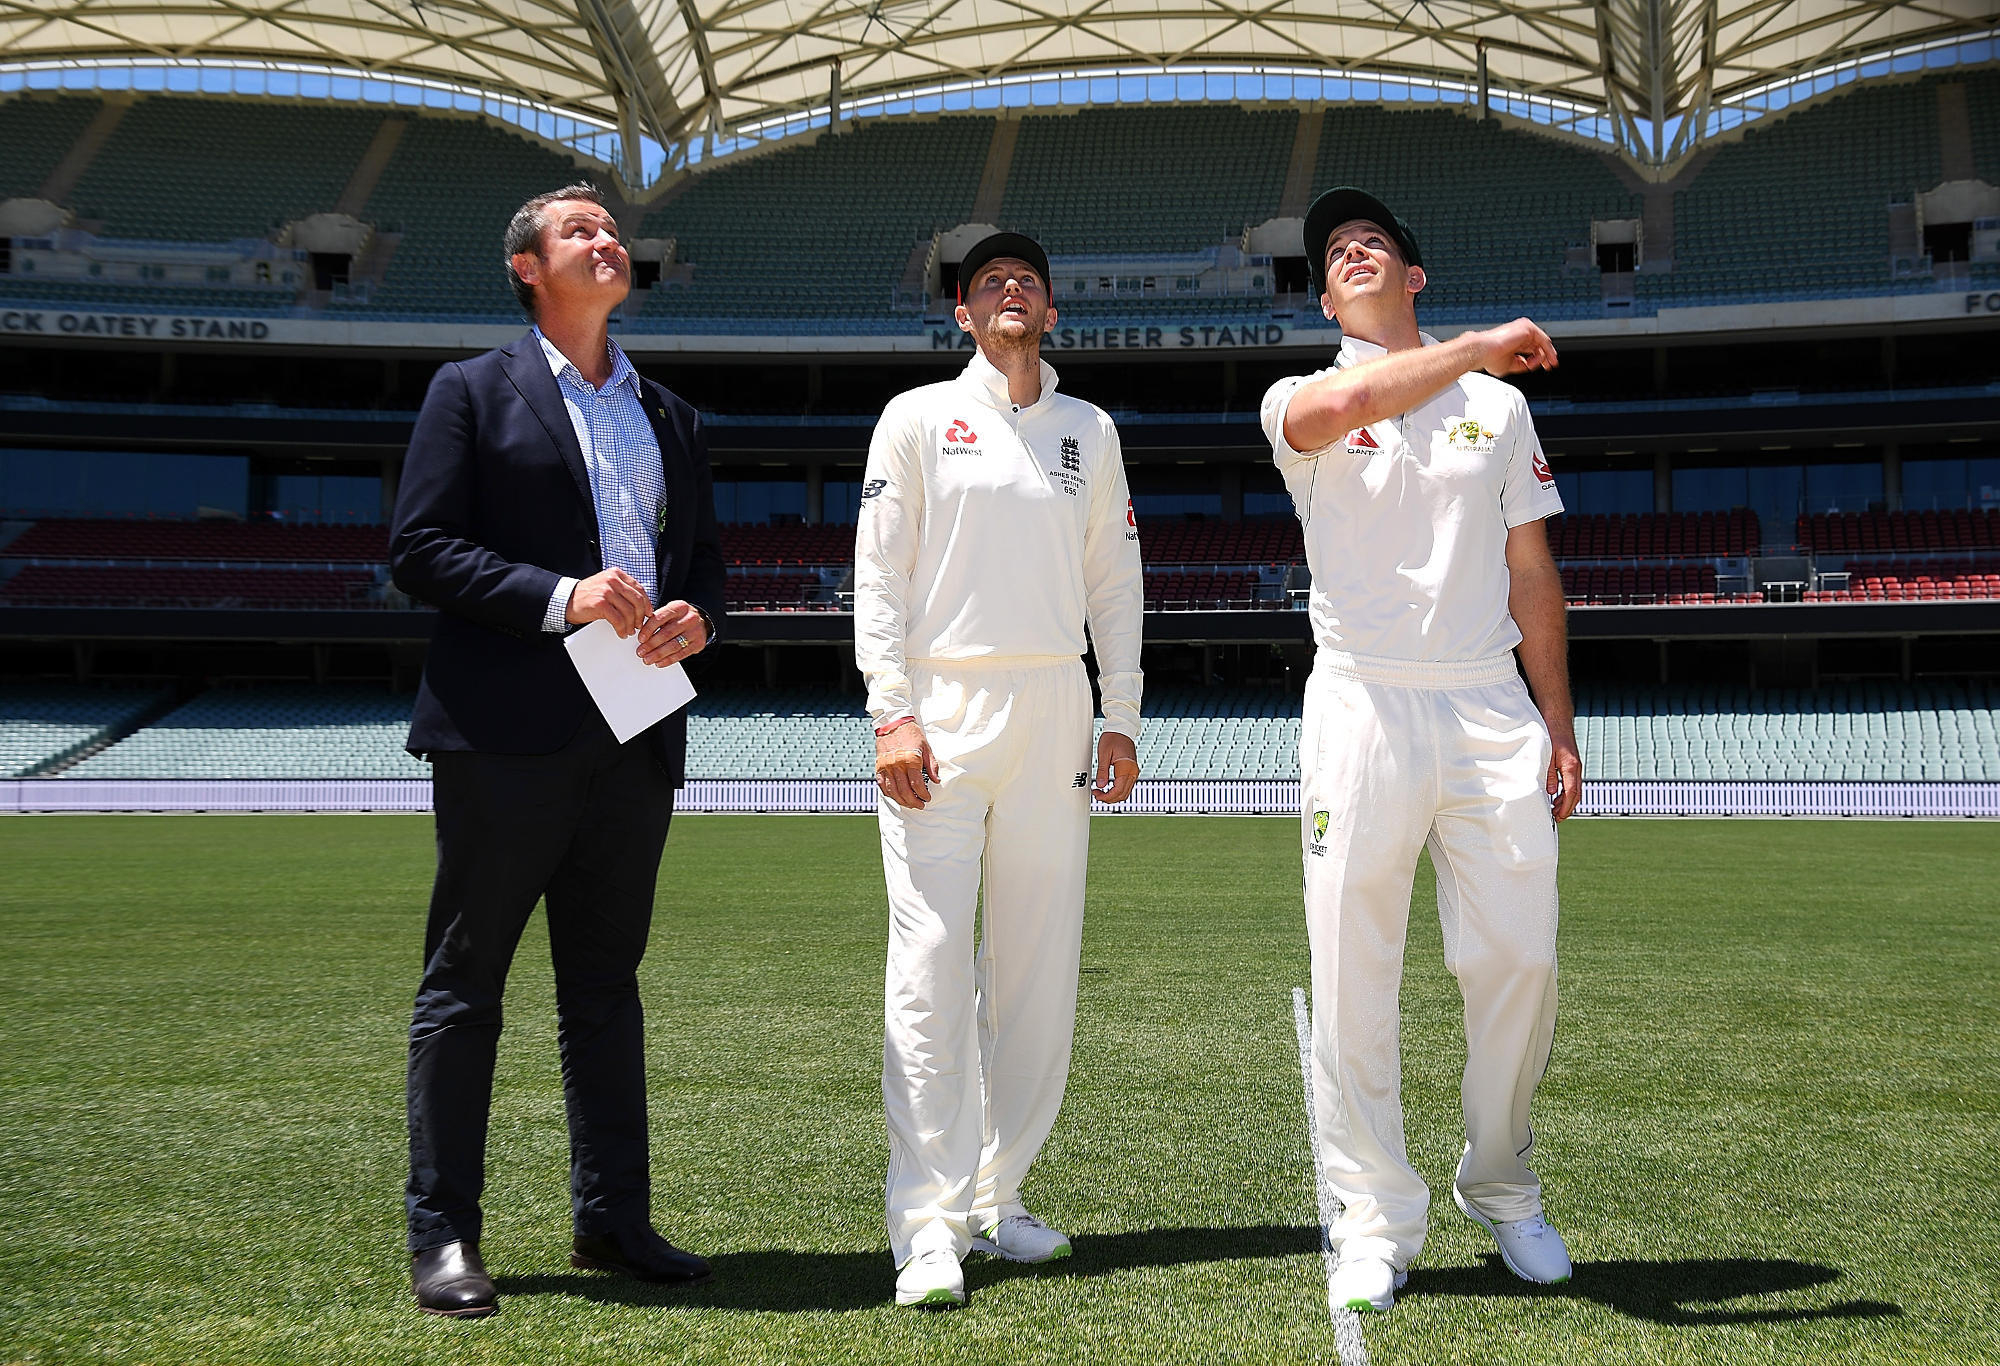 Joe Root and Tim Paine at the coin toss